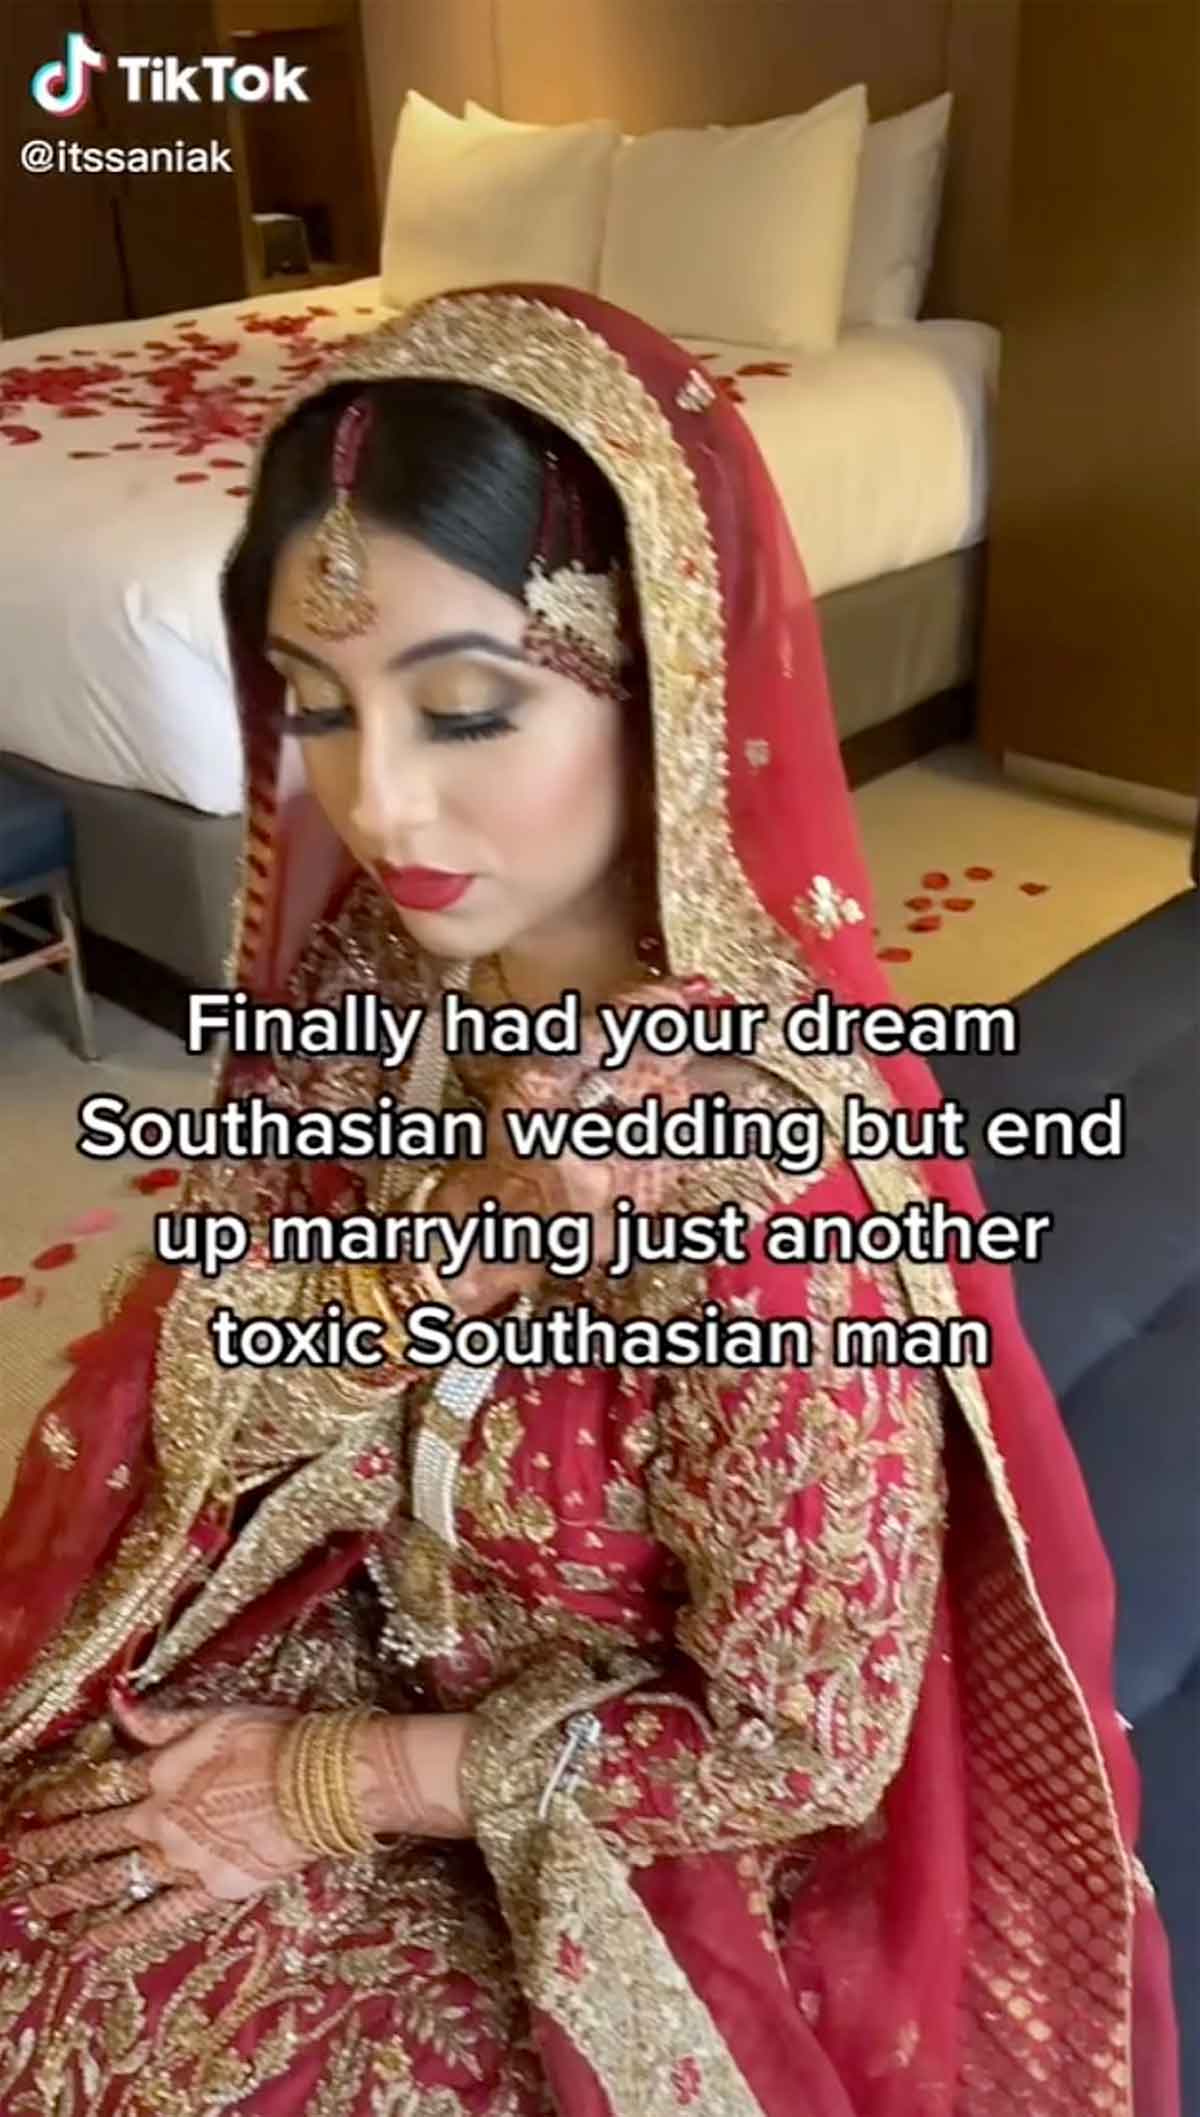 Sania Khan spoke of her family and community not supporting her during her divorce. Image courtesy: TikTok